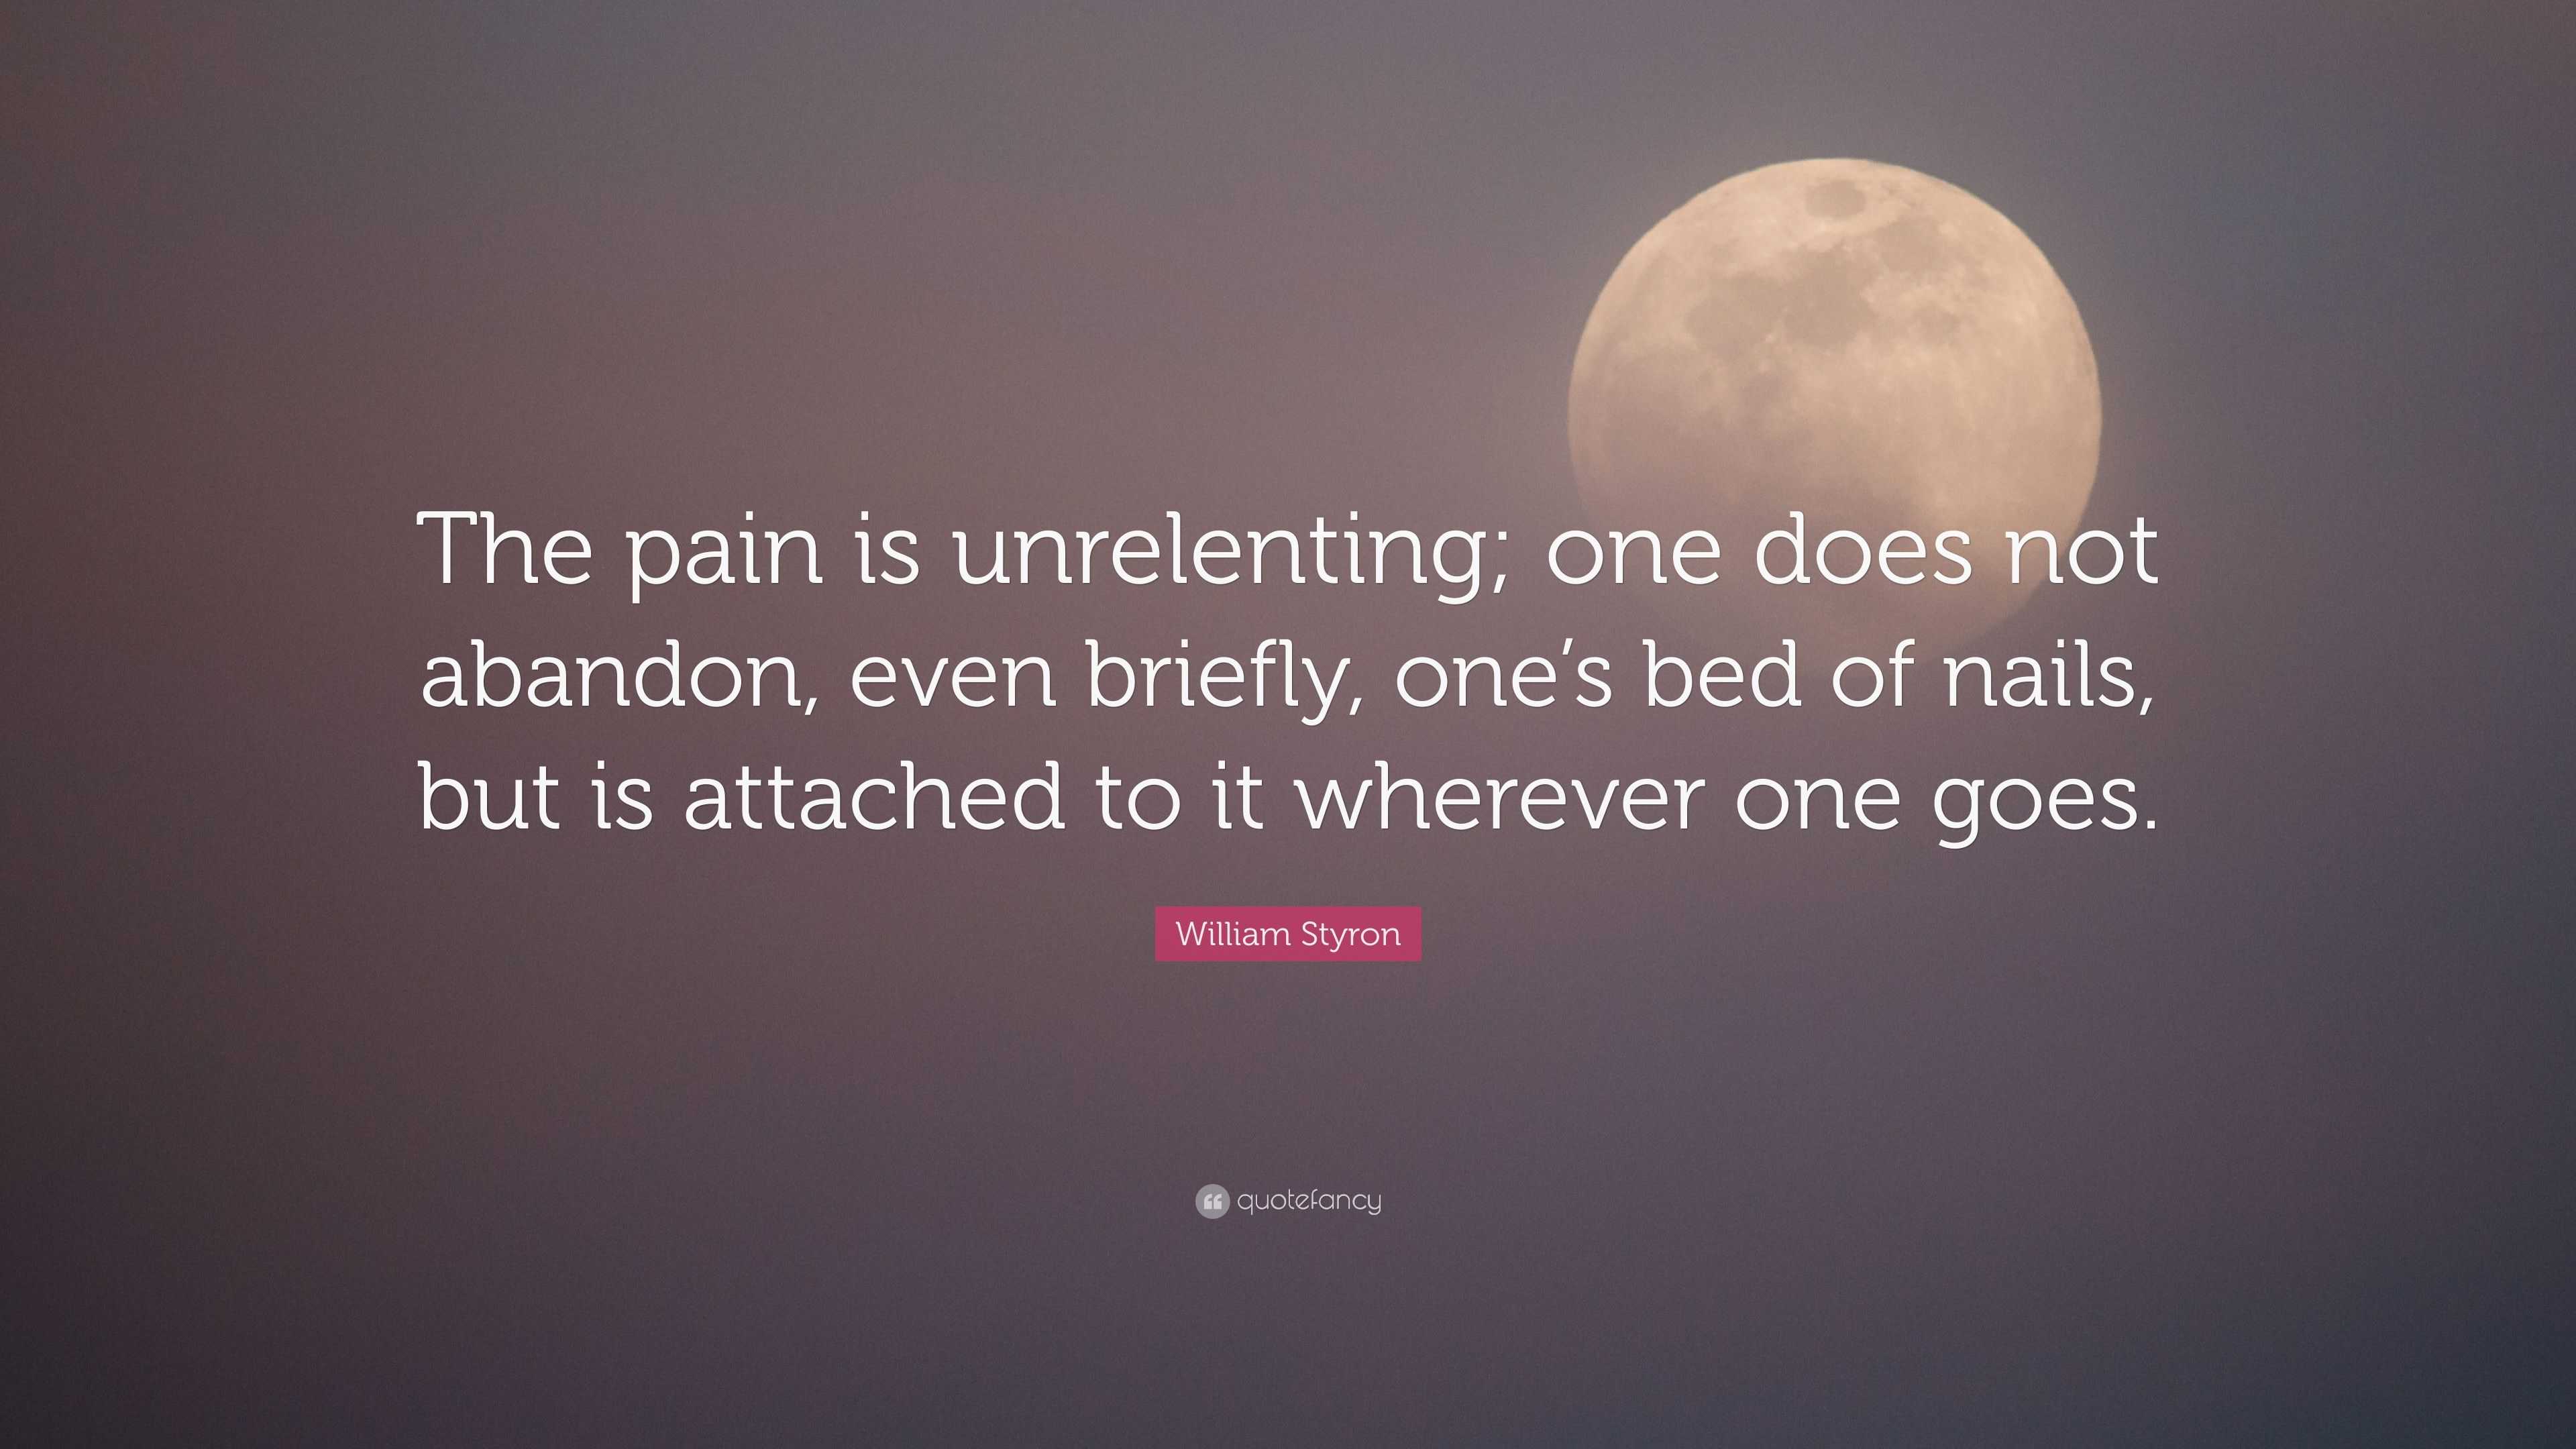 William Styron Quote: “The pain is unrelenting; one does not abandon, even  briefly, one's bed of nails, but is attached to it wherever one goes”